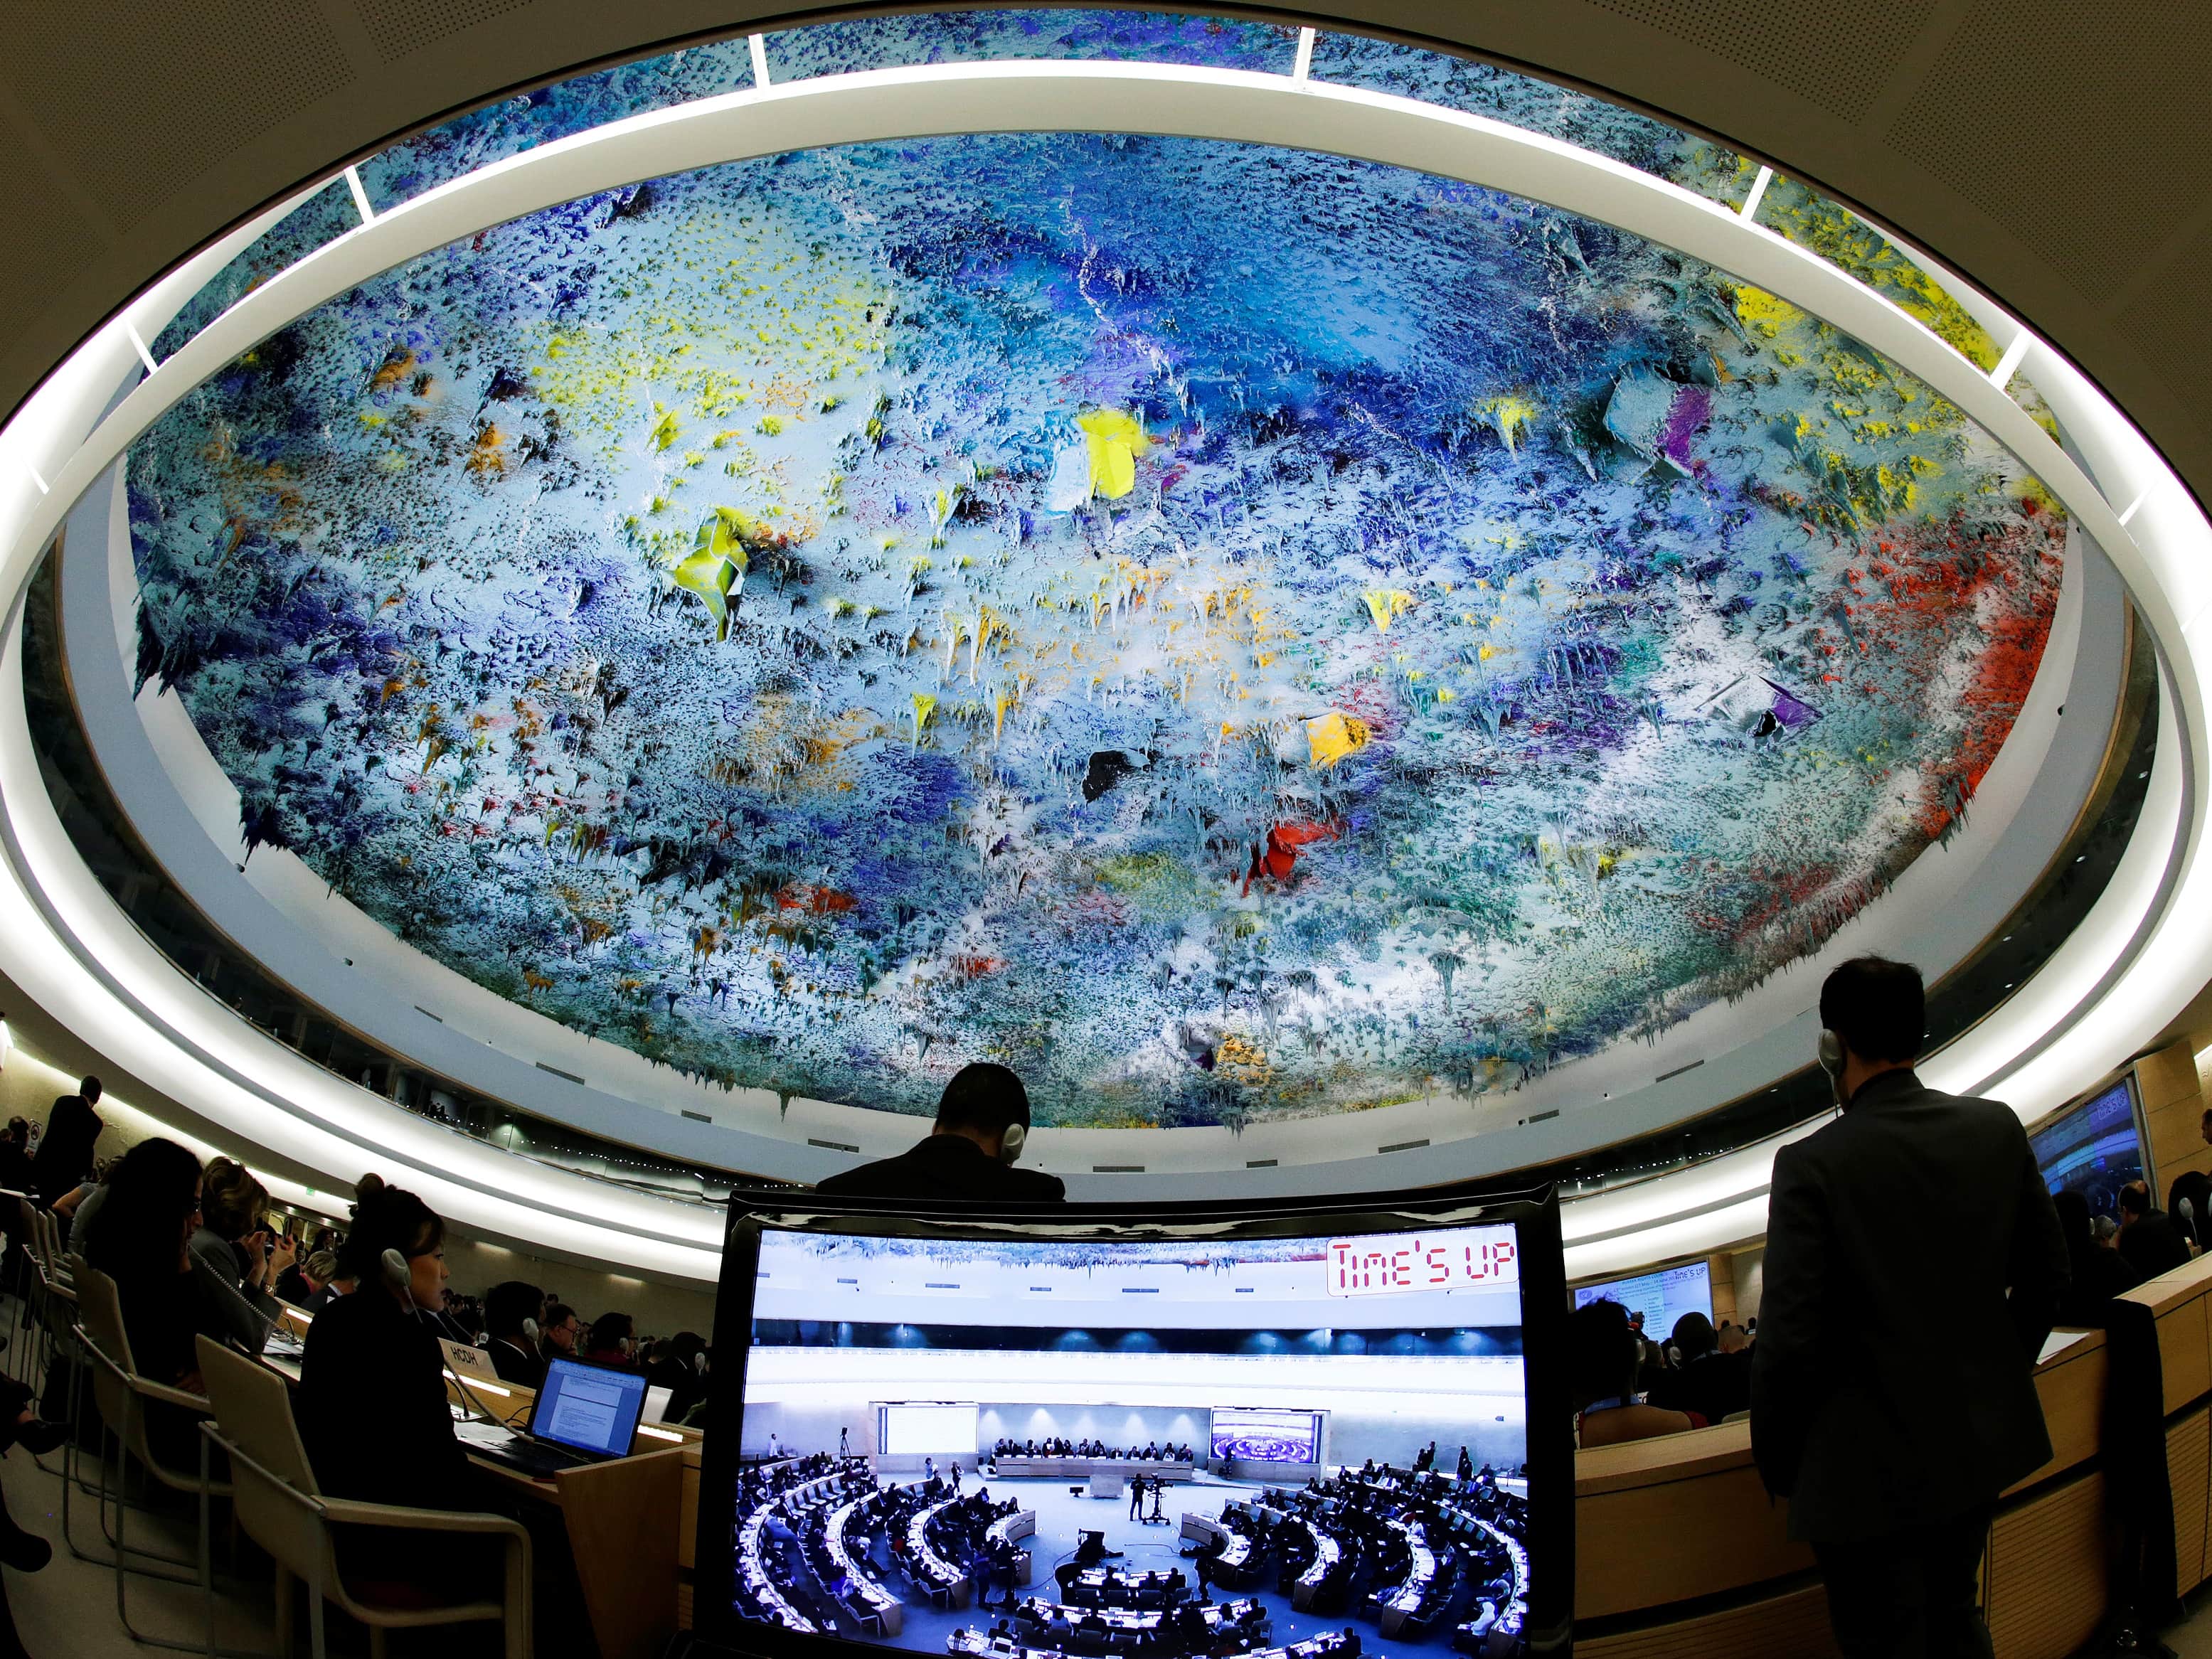 Overview of the room during a recent debate at the Human Rights Council in Geneva, May 2013, REUTERS/Denis Balibouse